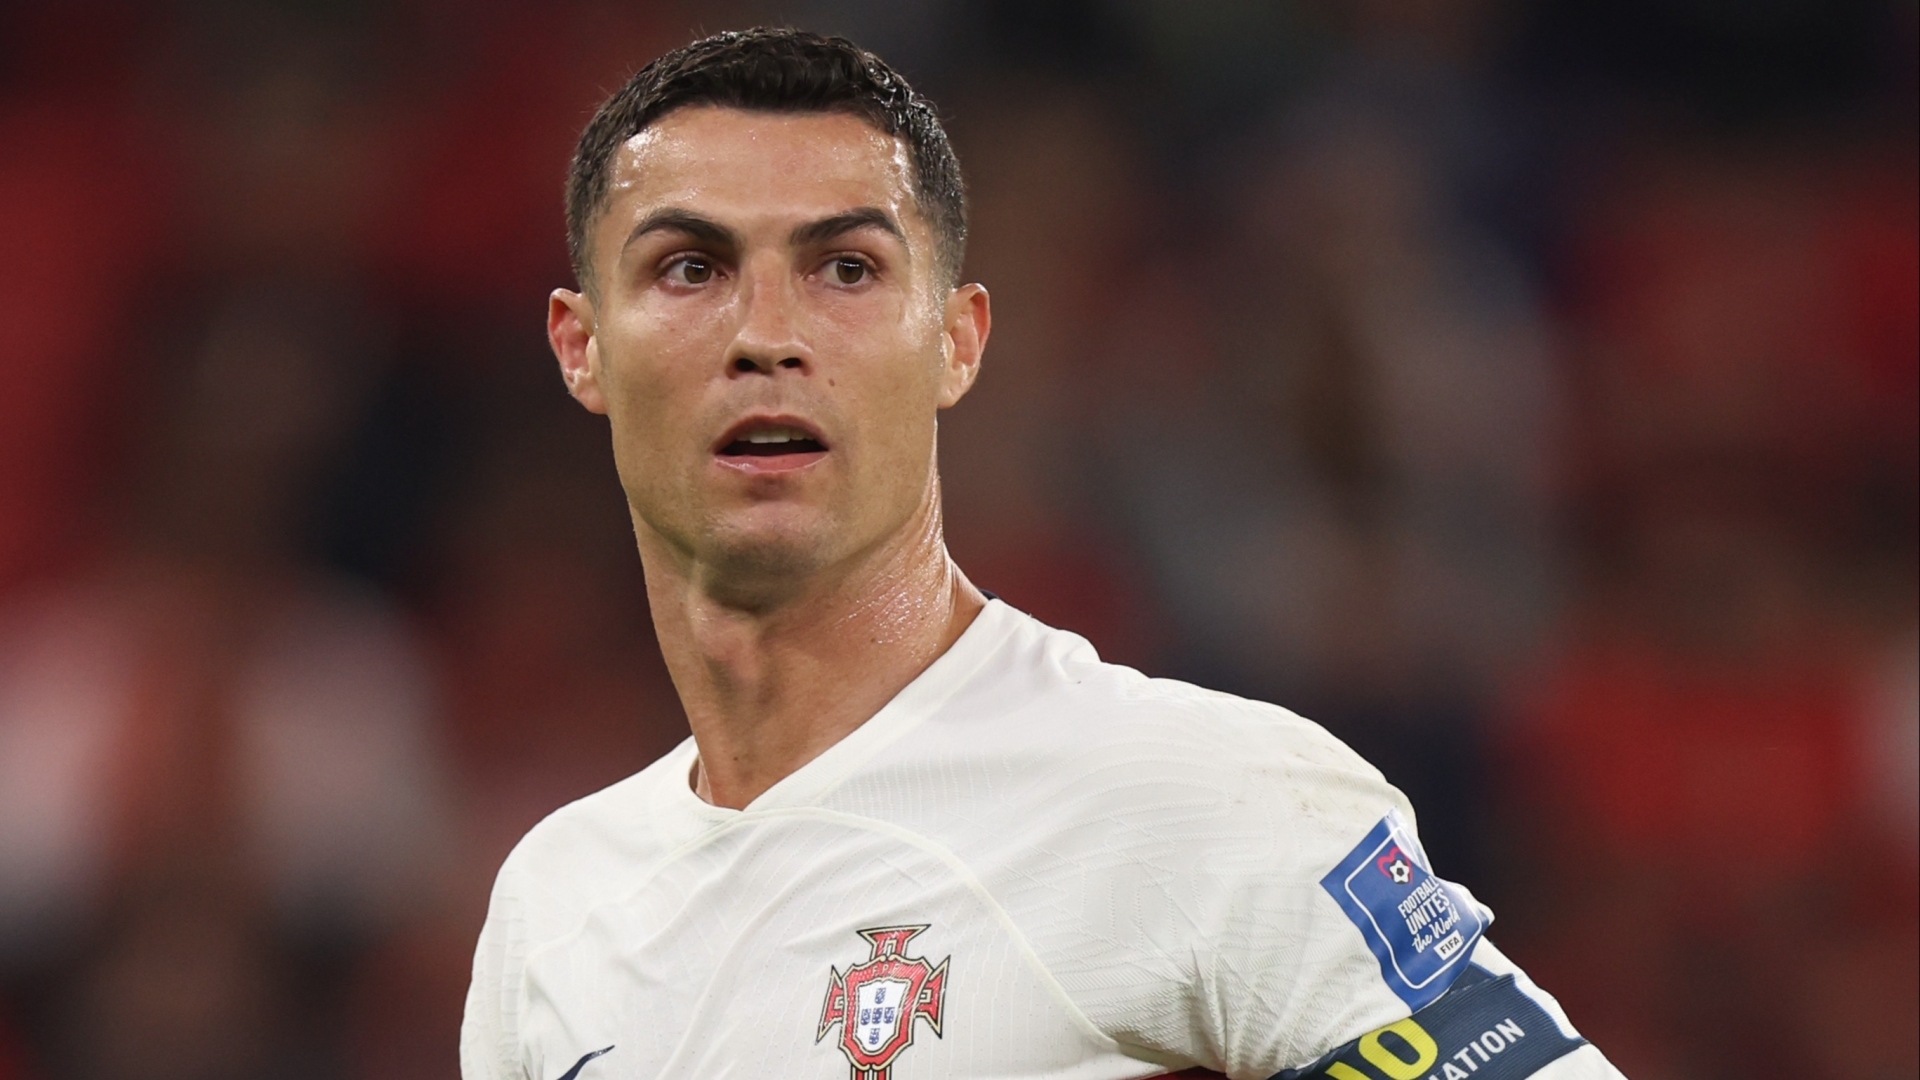 Ronaldo set to be in Portugal squad ending speculation over international future